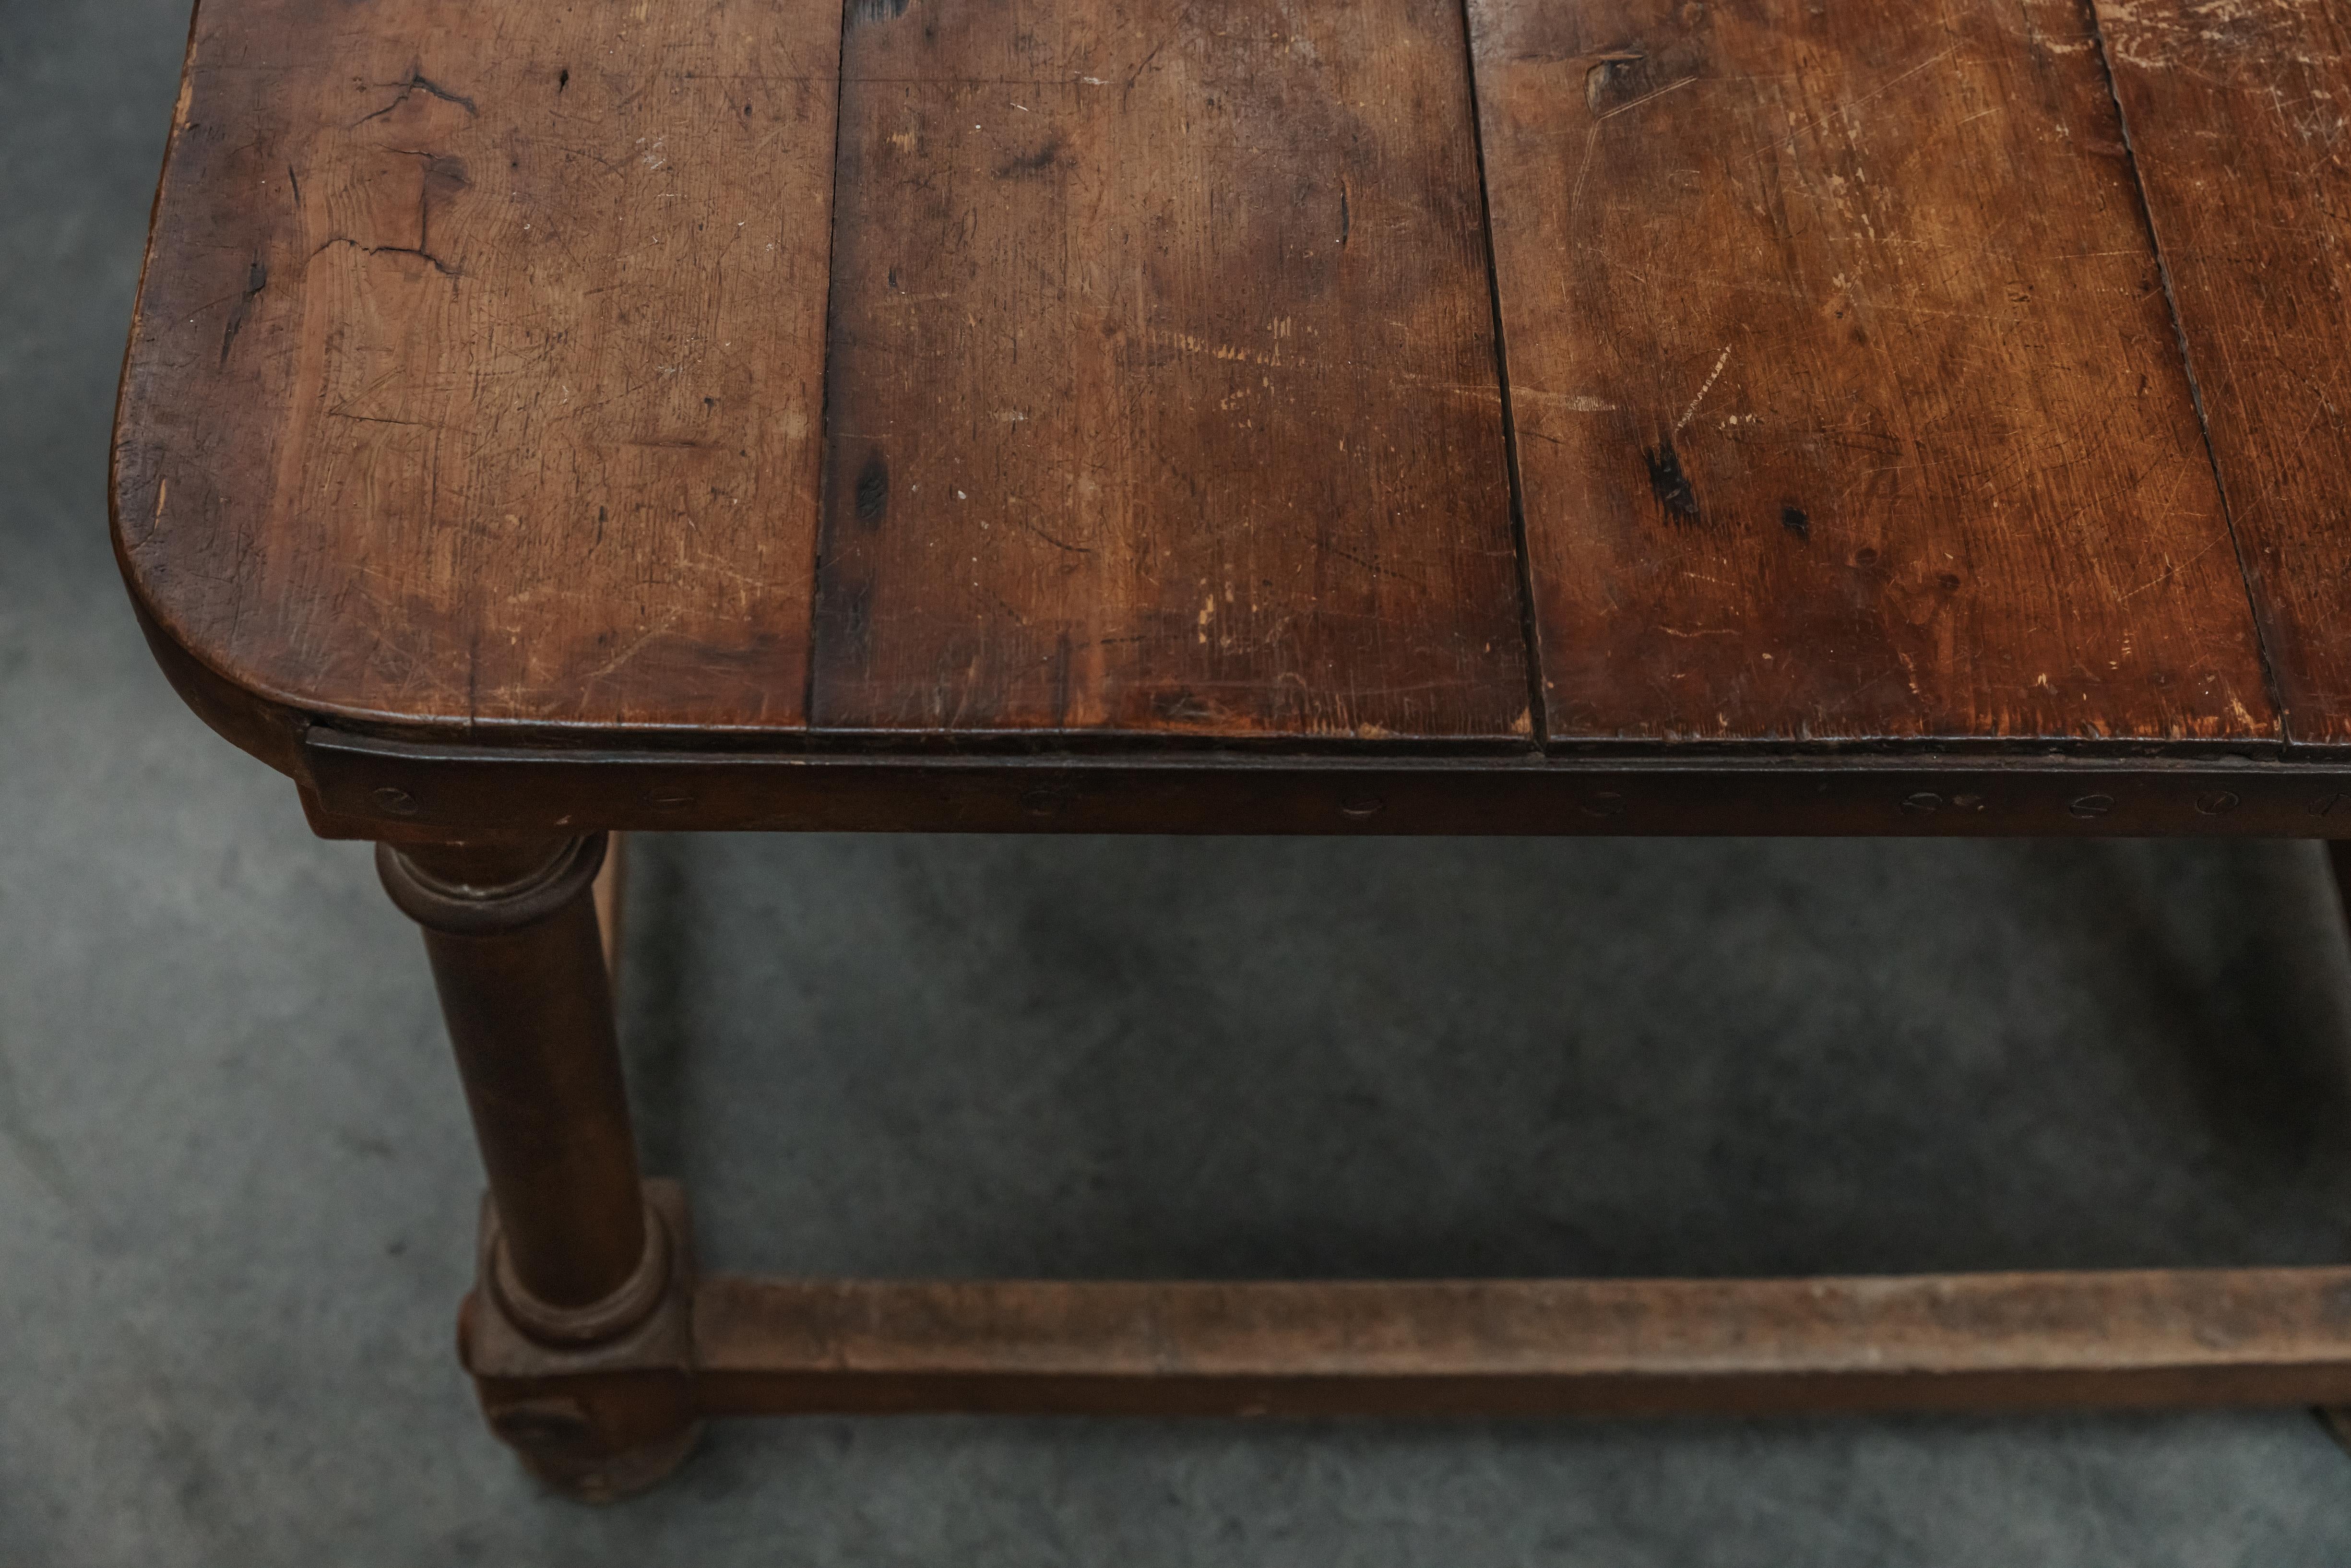 Early Primitive Kitchen Prep Table From France, Circa 1890.  Solid, heavy construction with original hardware.  Great patina.